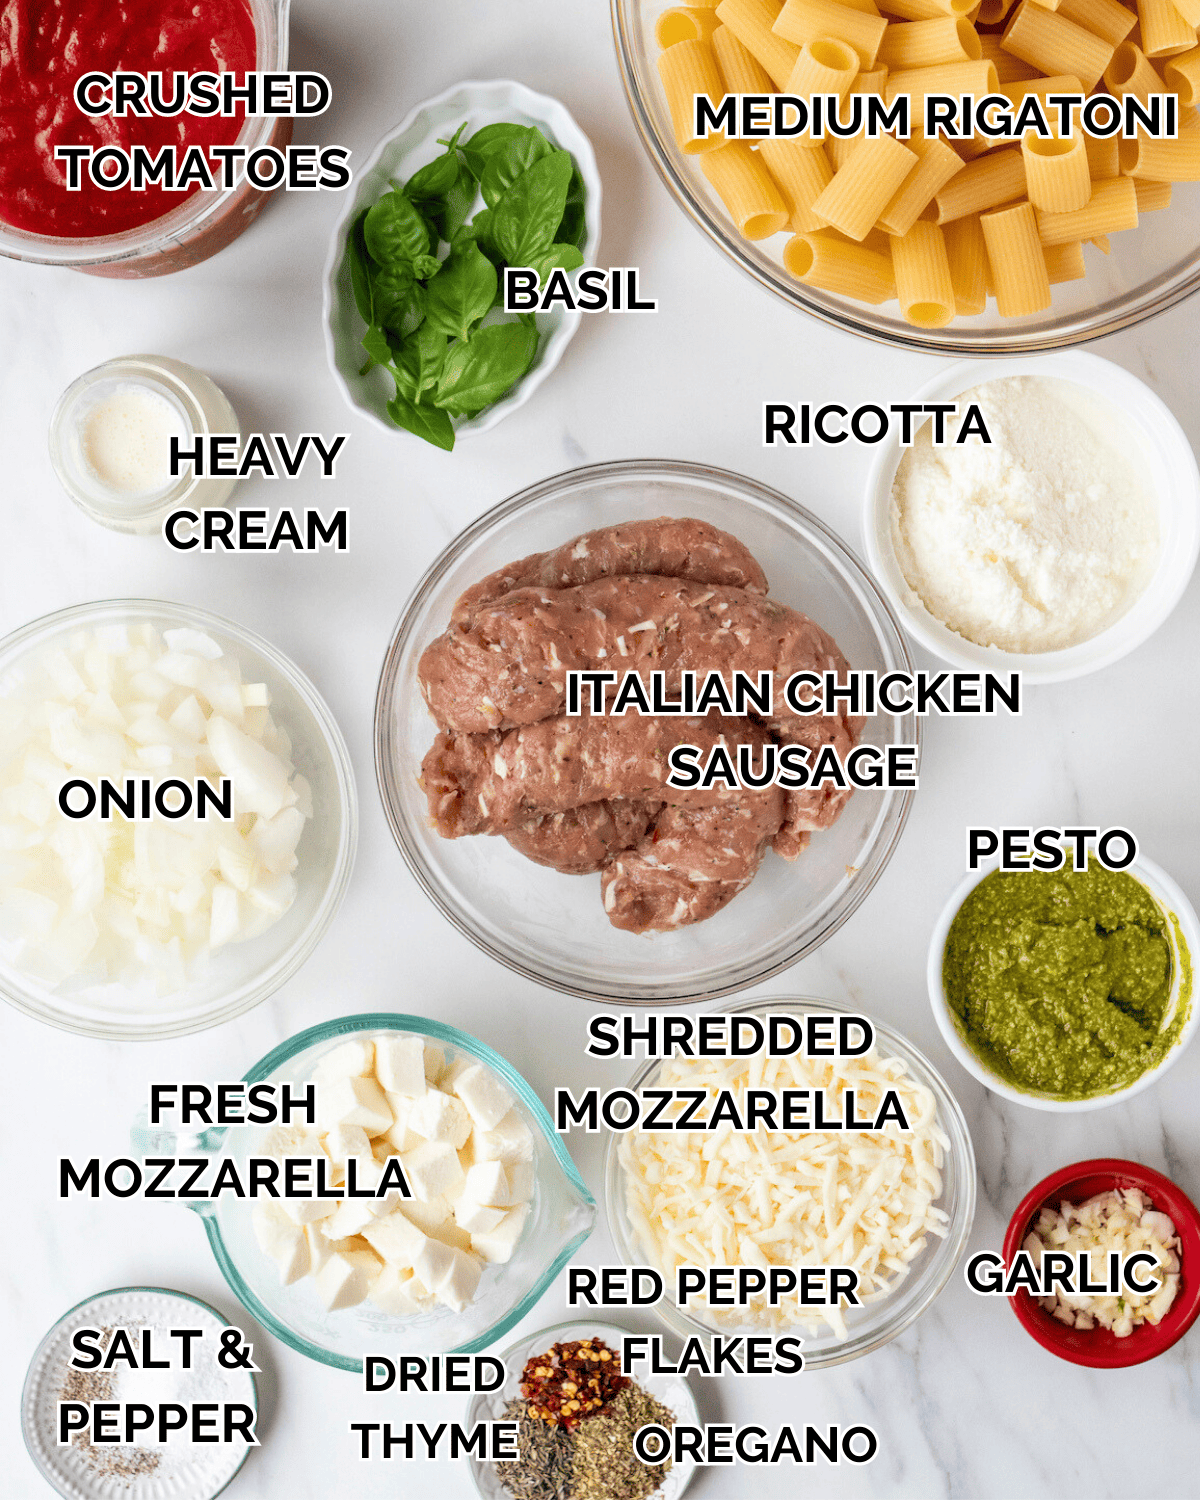 Mise-en-place with all the ingredients required to make baked rigatoni with ground chicken sausage, pesto and ricotta.